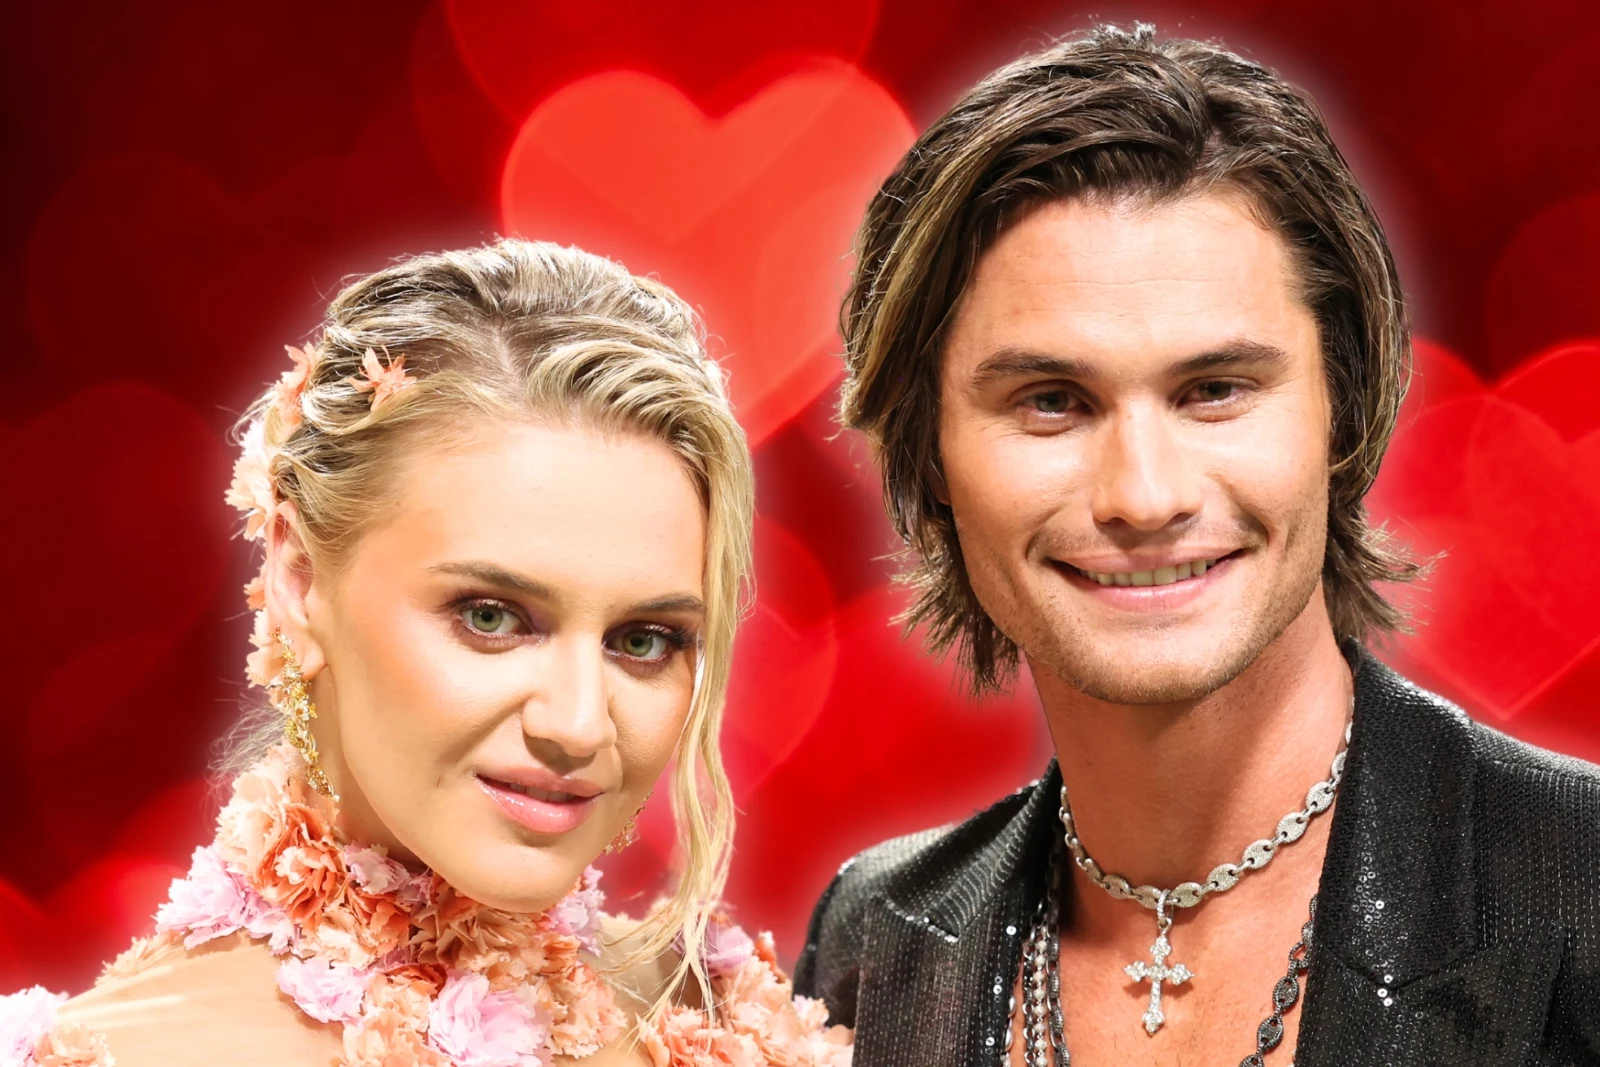 Kelsea Ballerini + Chase Stokes: Who Said ‘I Love You’ First?